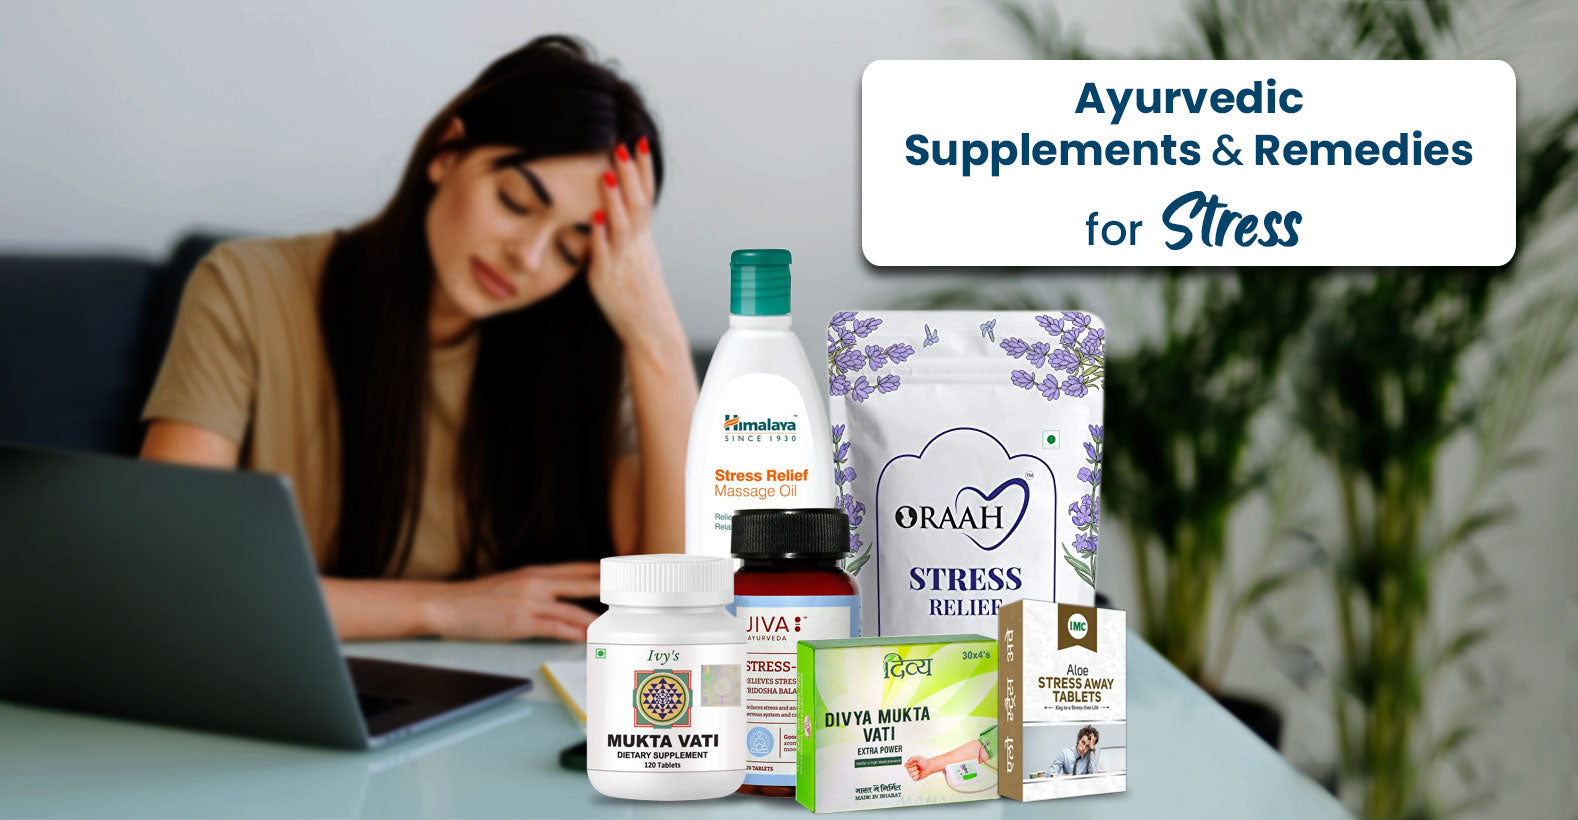 Best Ayurvedic Products and Remedies For Stress